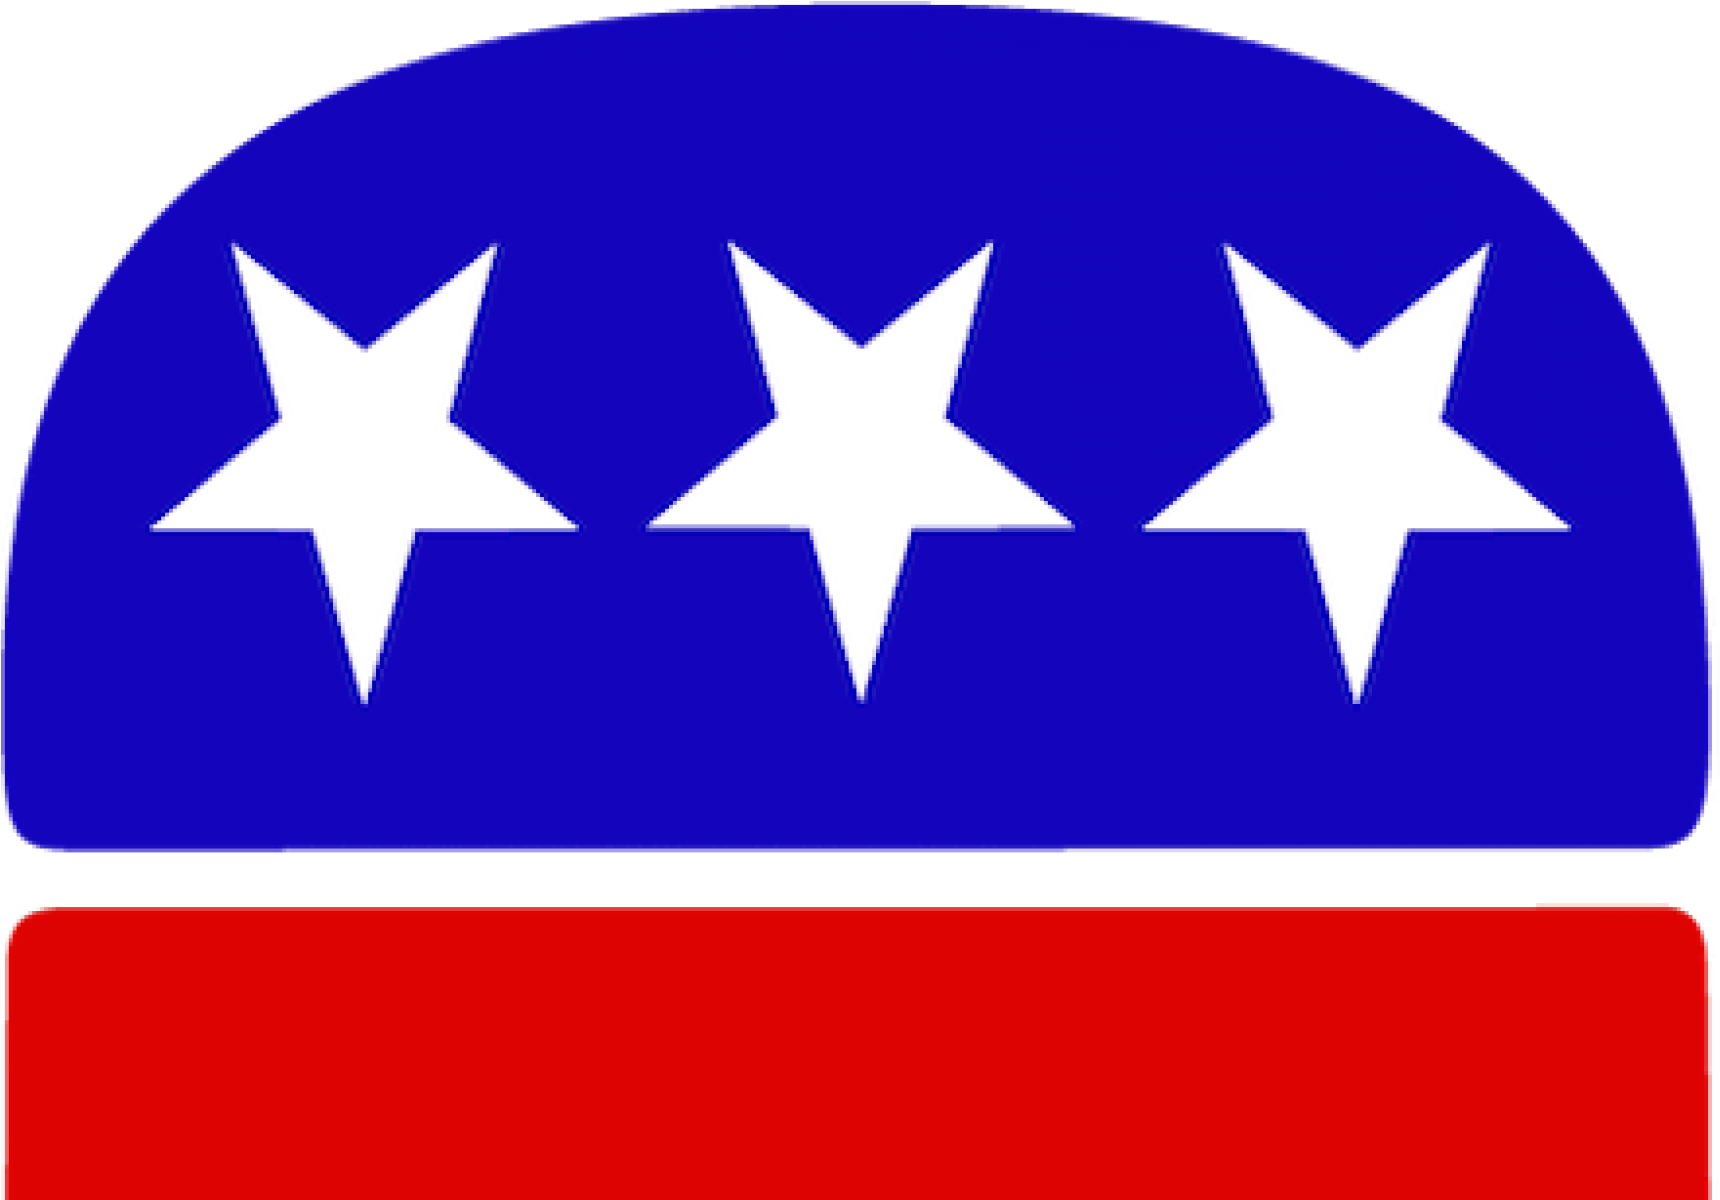 Cropped Cropped Republican Rmc Republican Black And White